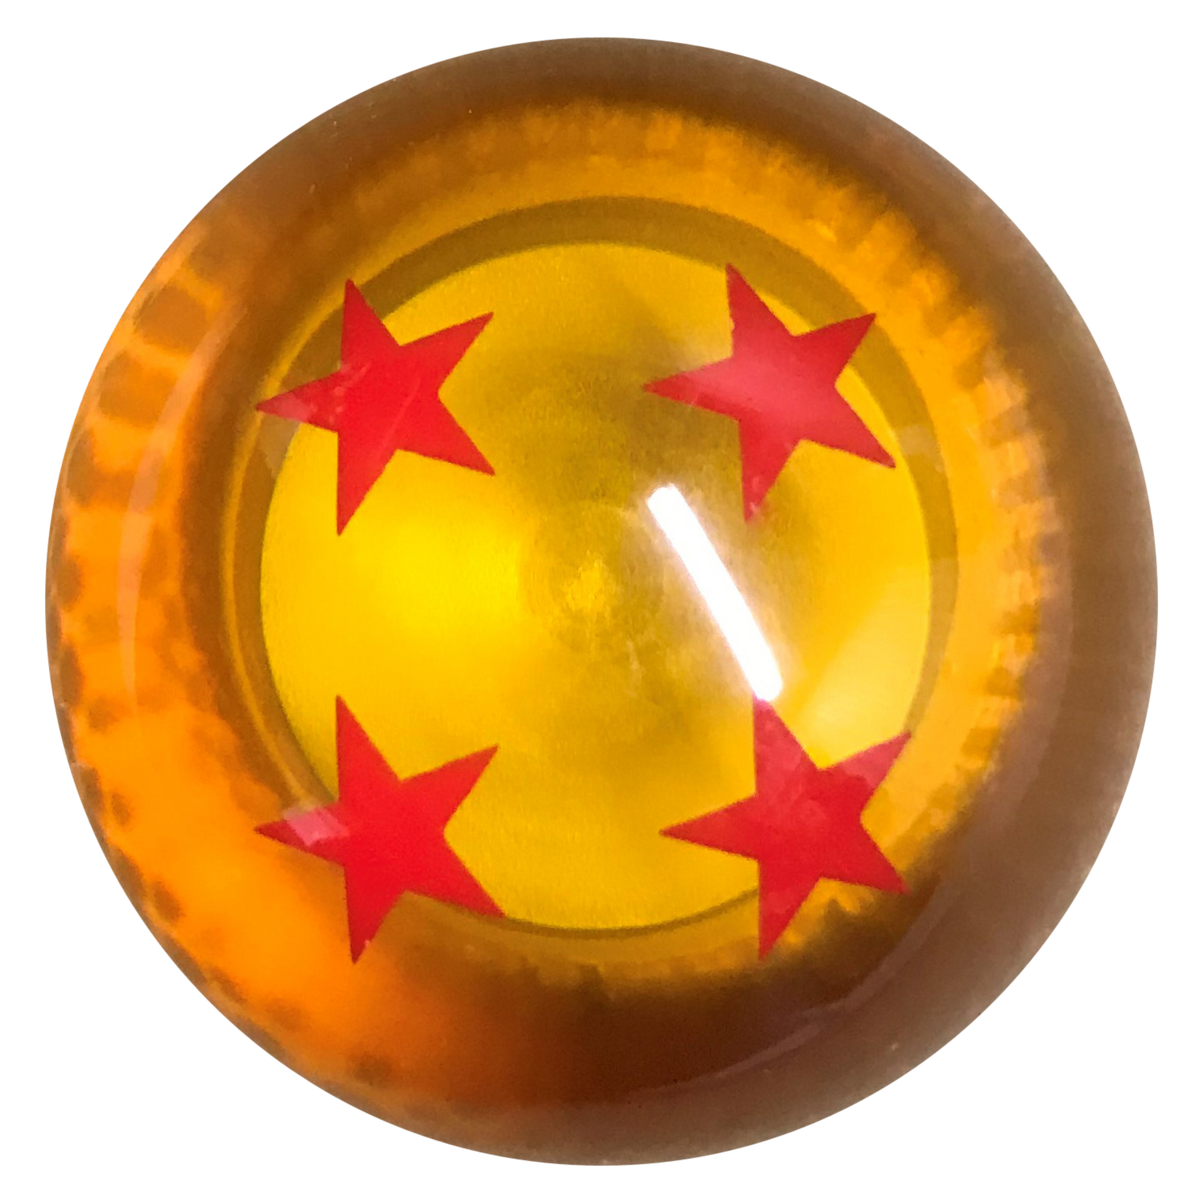 Dragon Ball Z Amber With 4 Red Stars Shift Knob